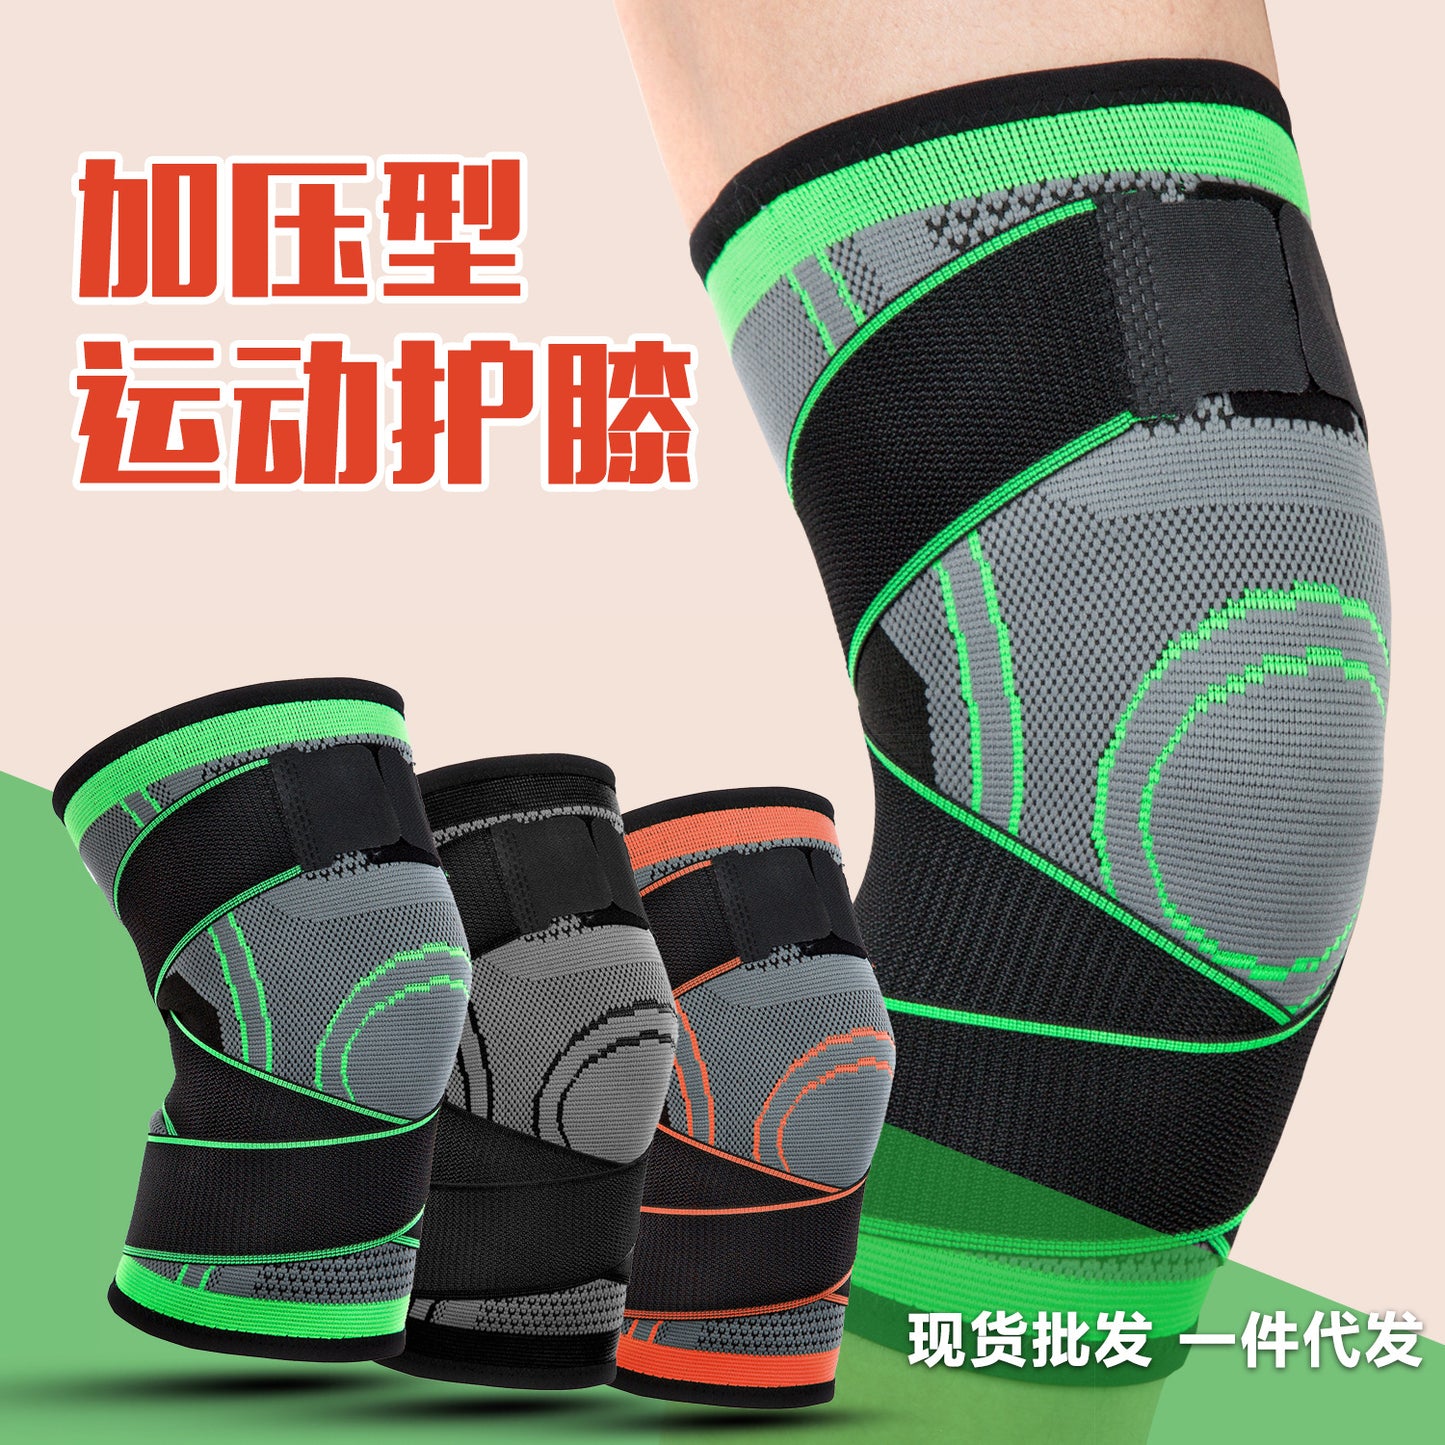 Daily sports knee pads Outdoor compression protection running hiking Knitting protective gear